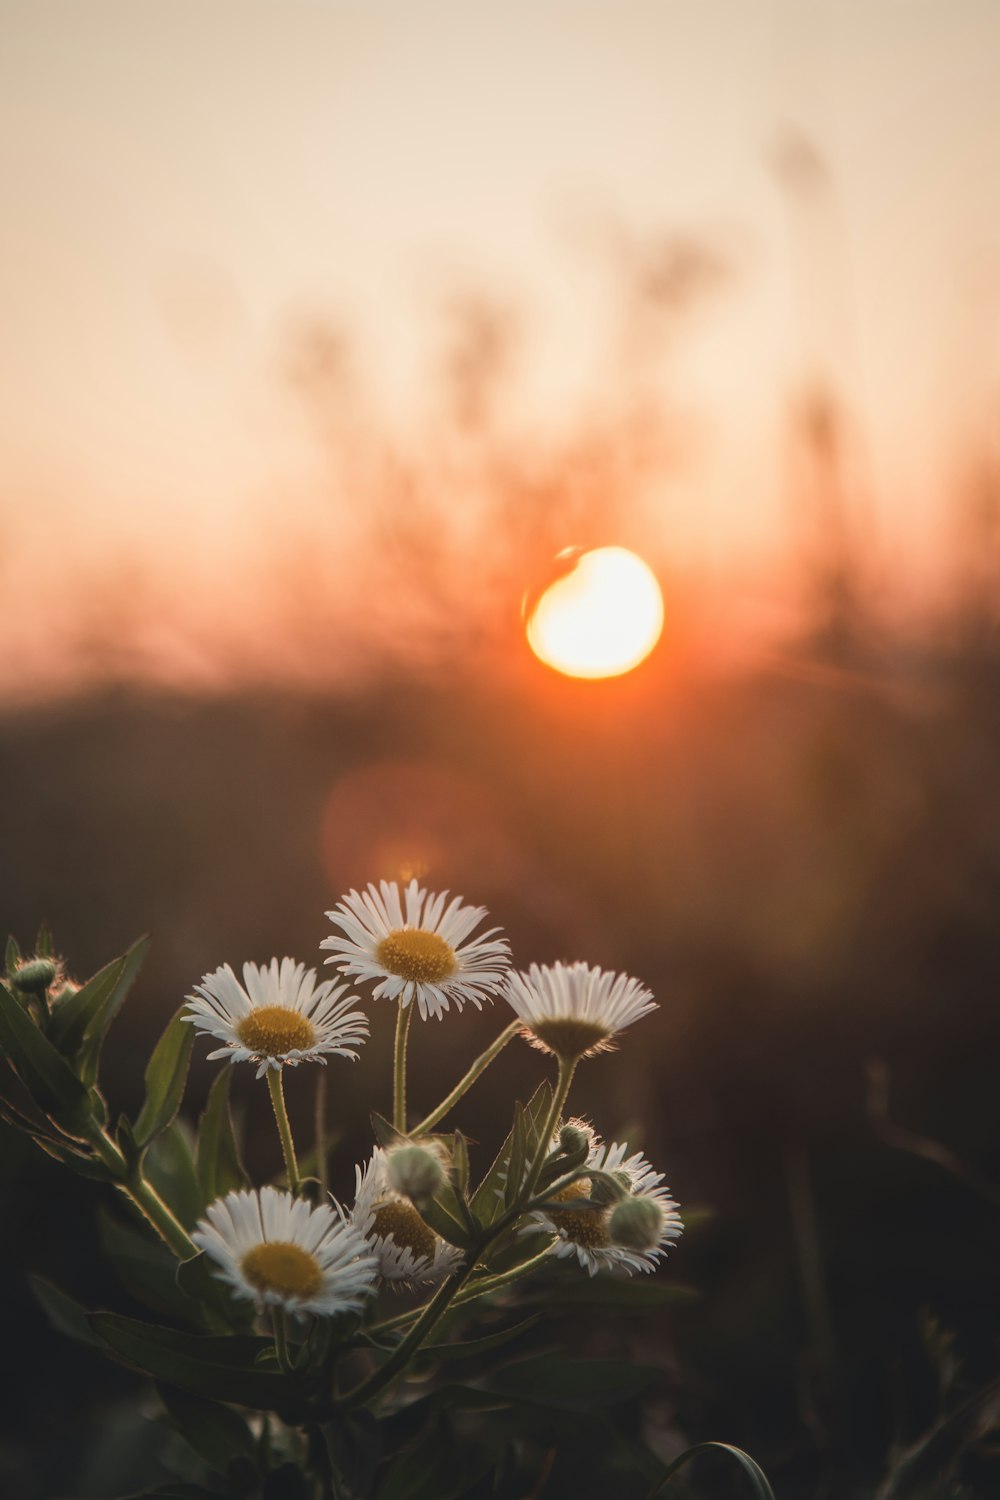 550+ Flowers Nature Pictures | Download Free Images on Unsplash